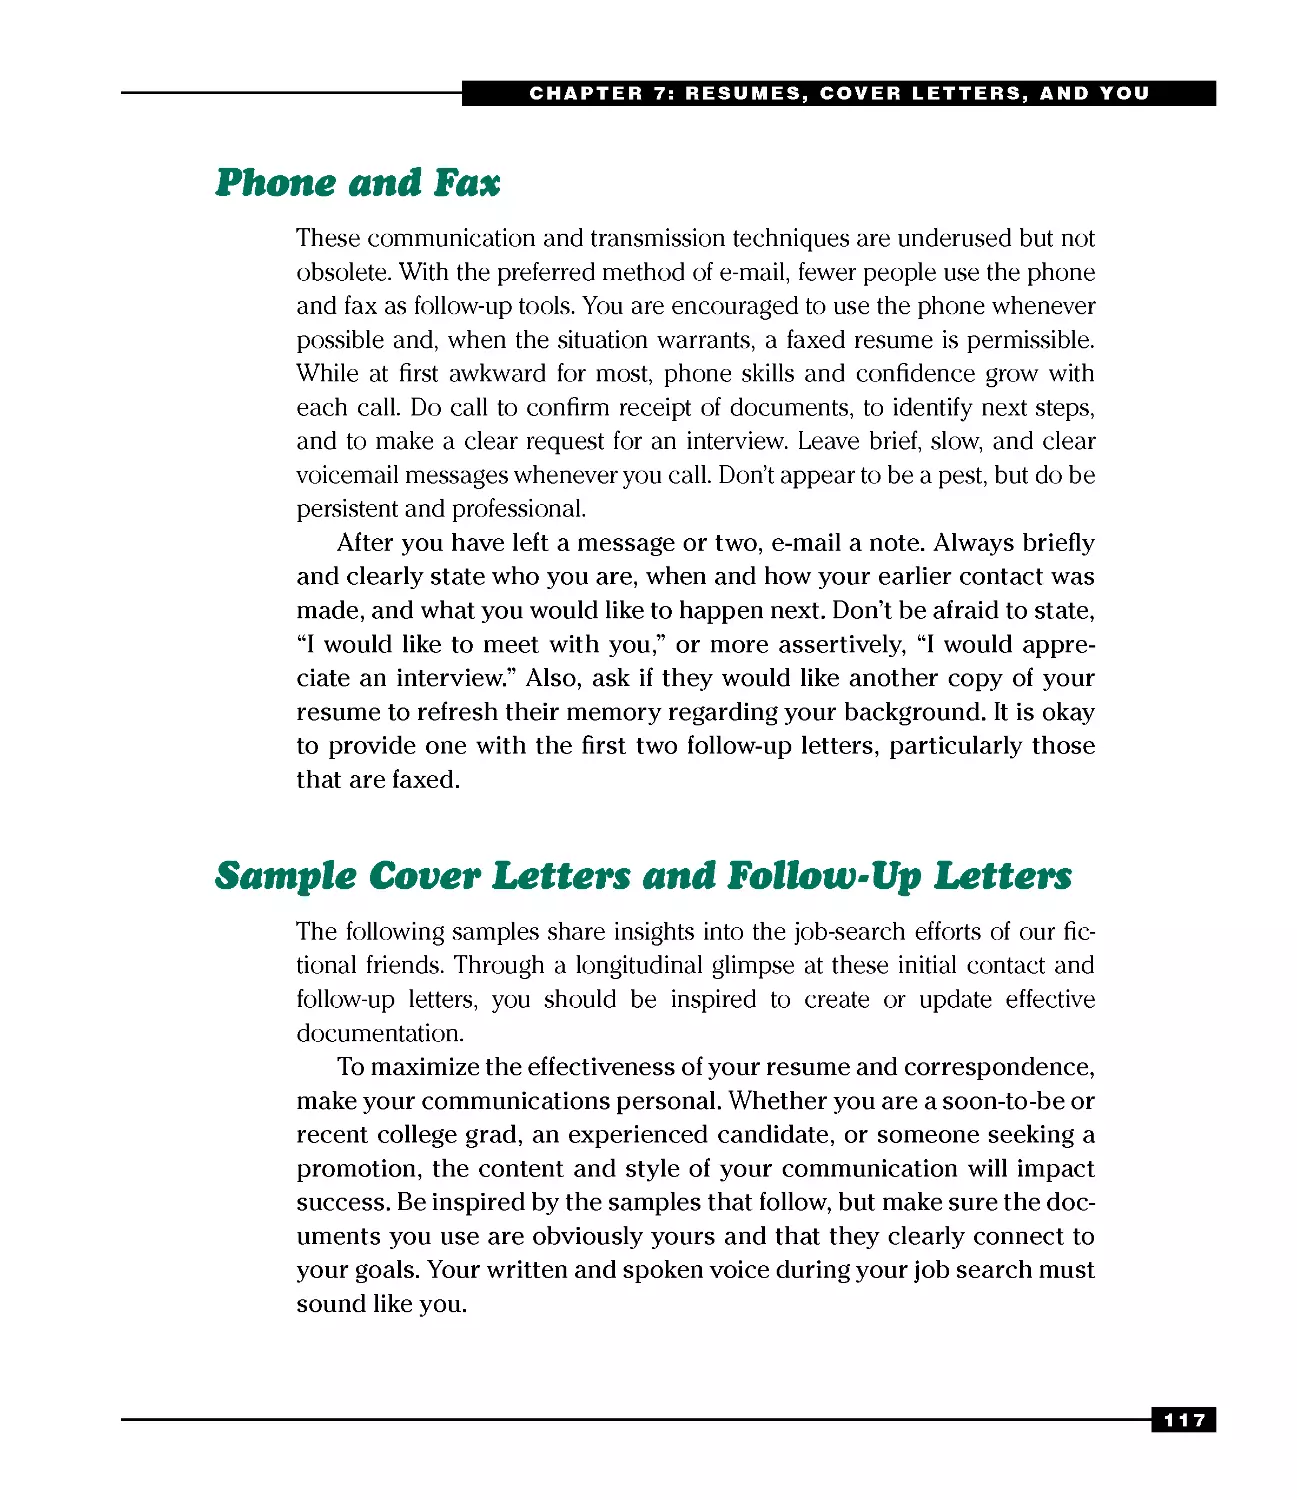 Phone and Fax
Sample Cover Letters and Follow-Up Letters